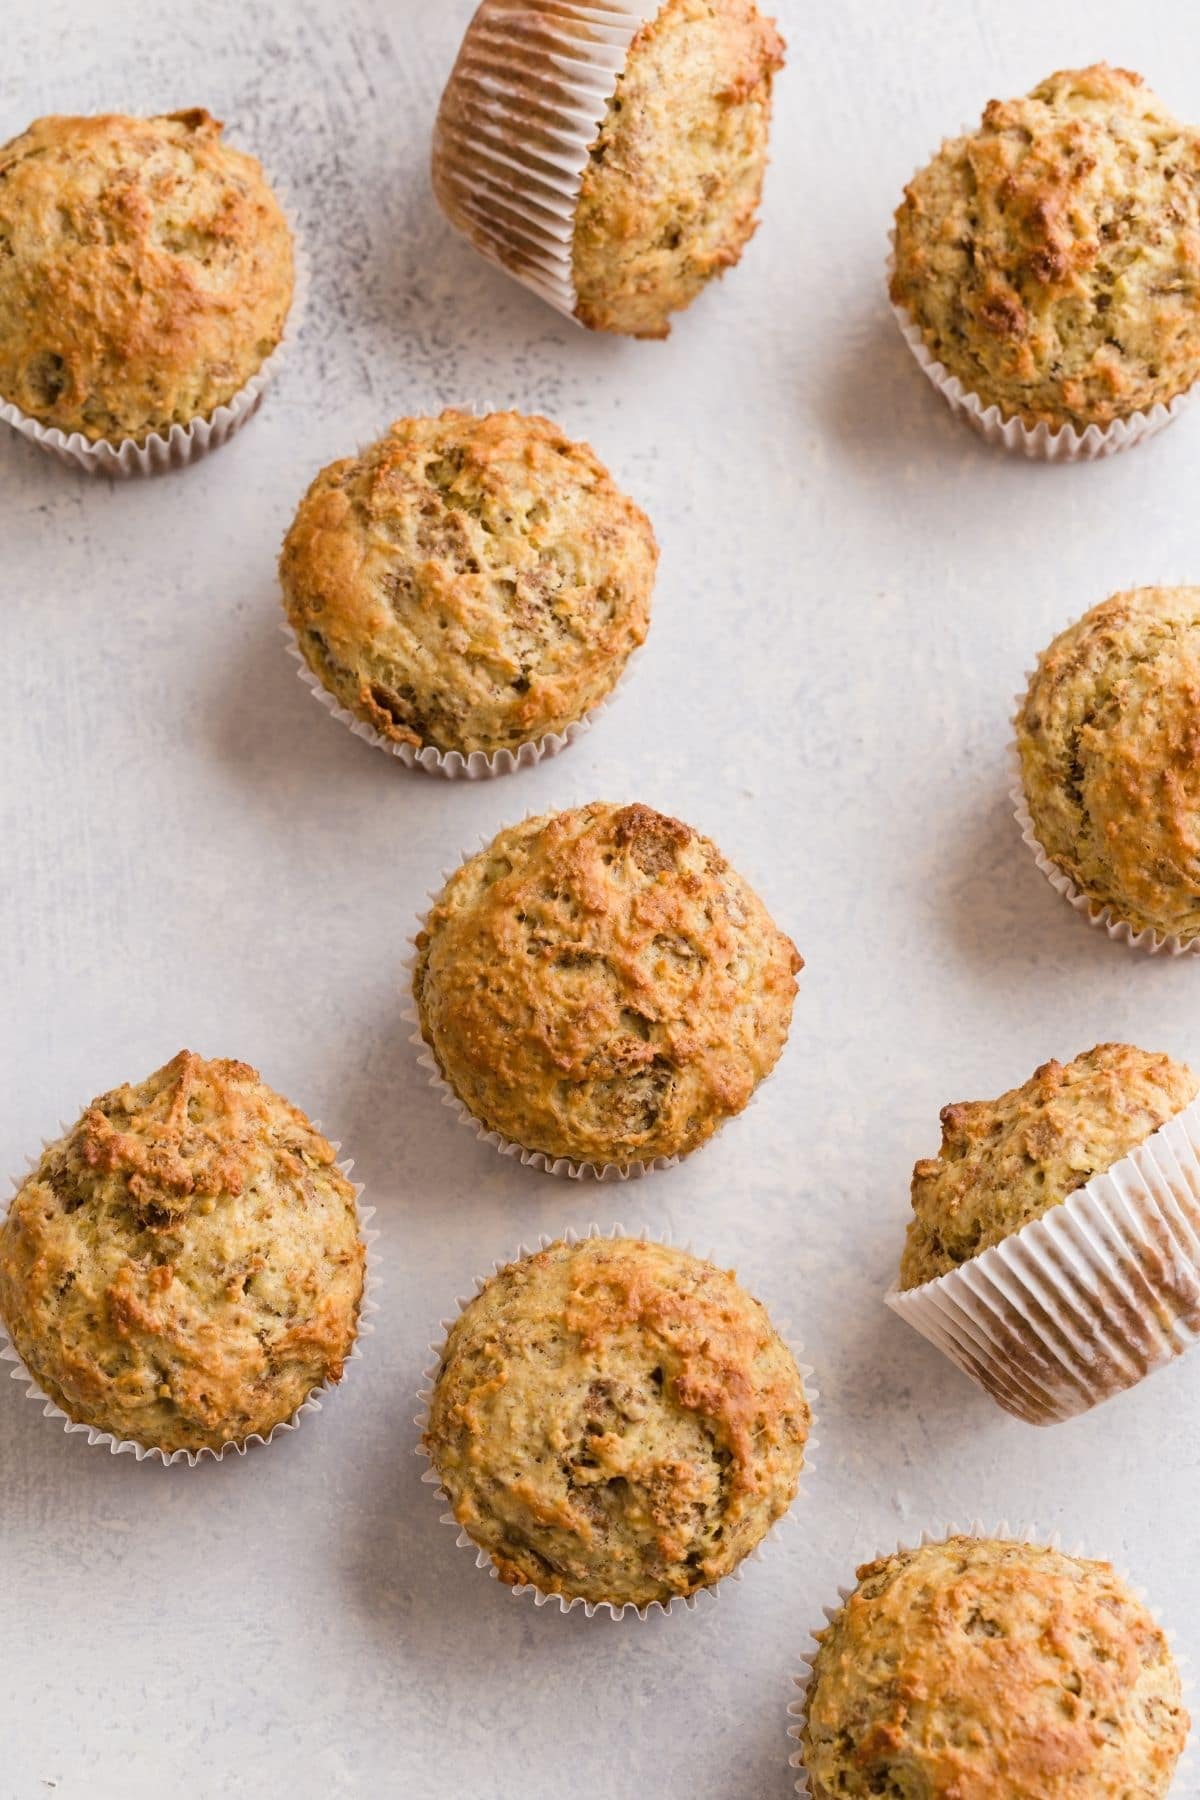 Banana Bran Muffins scattered on a white table top.